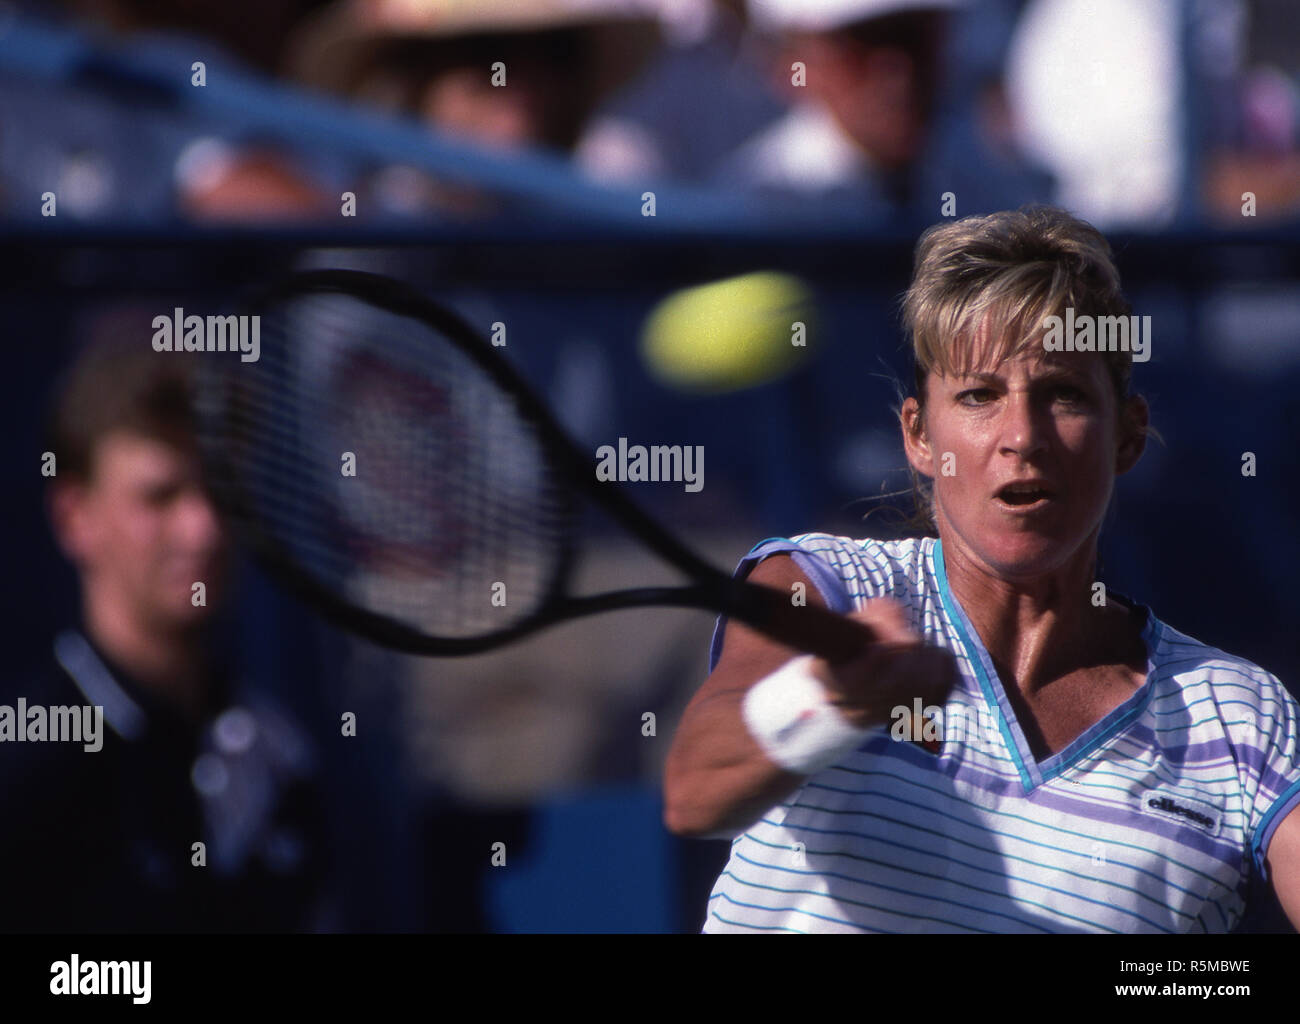 Chris Evert competing in U.S. Open in Flushing Meadows during the 1980's. Stock Photo